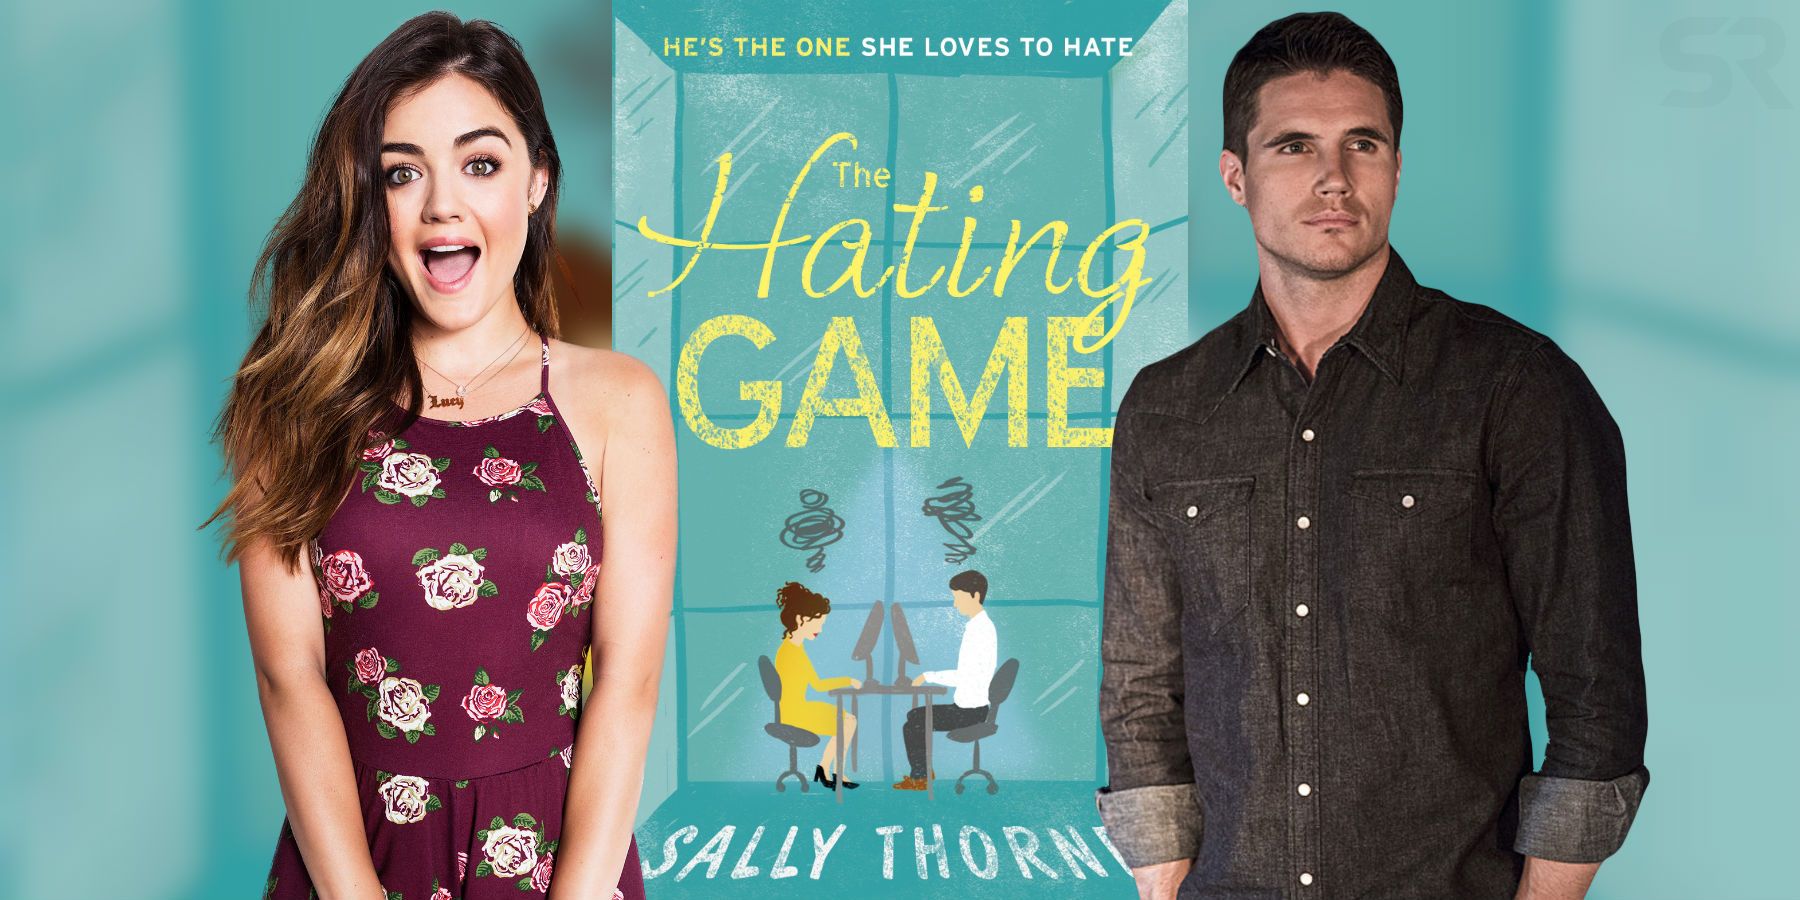 The-Hating-Game-Movie-Lucy-Hale-Robbie-Amell.jpg